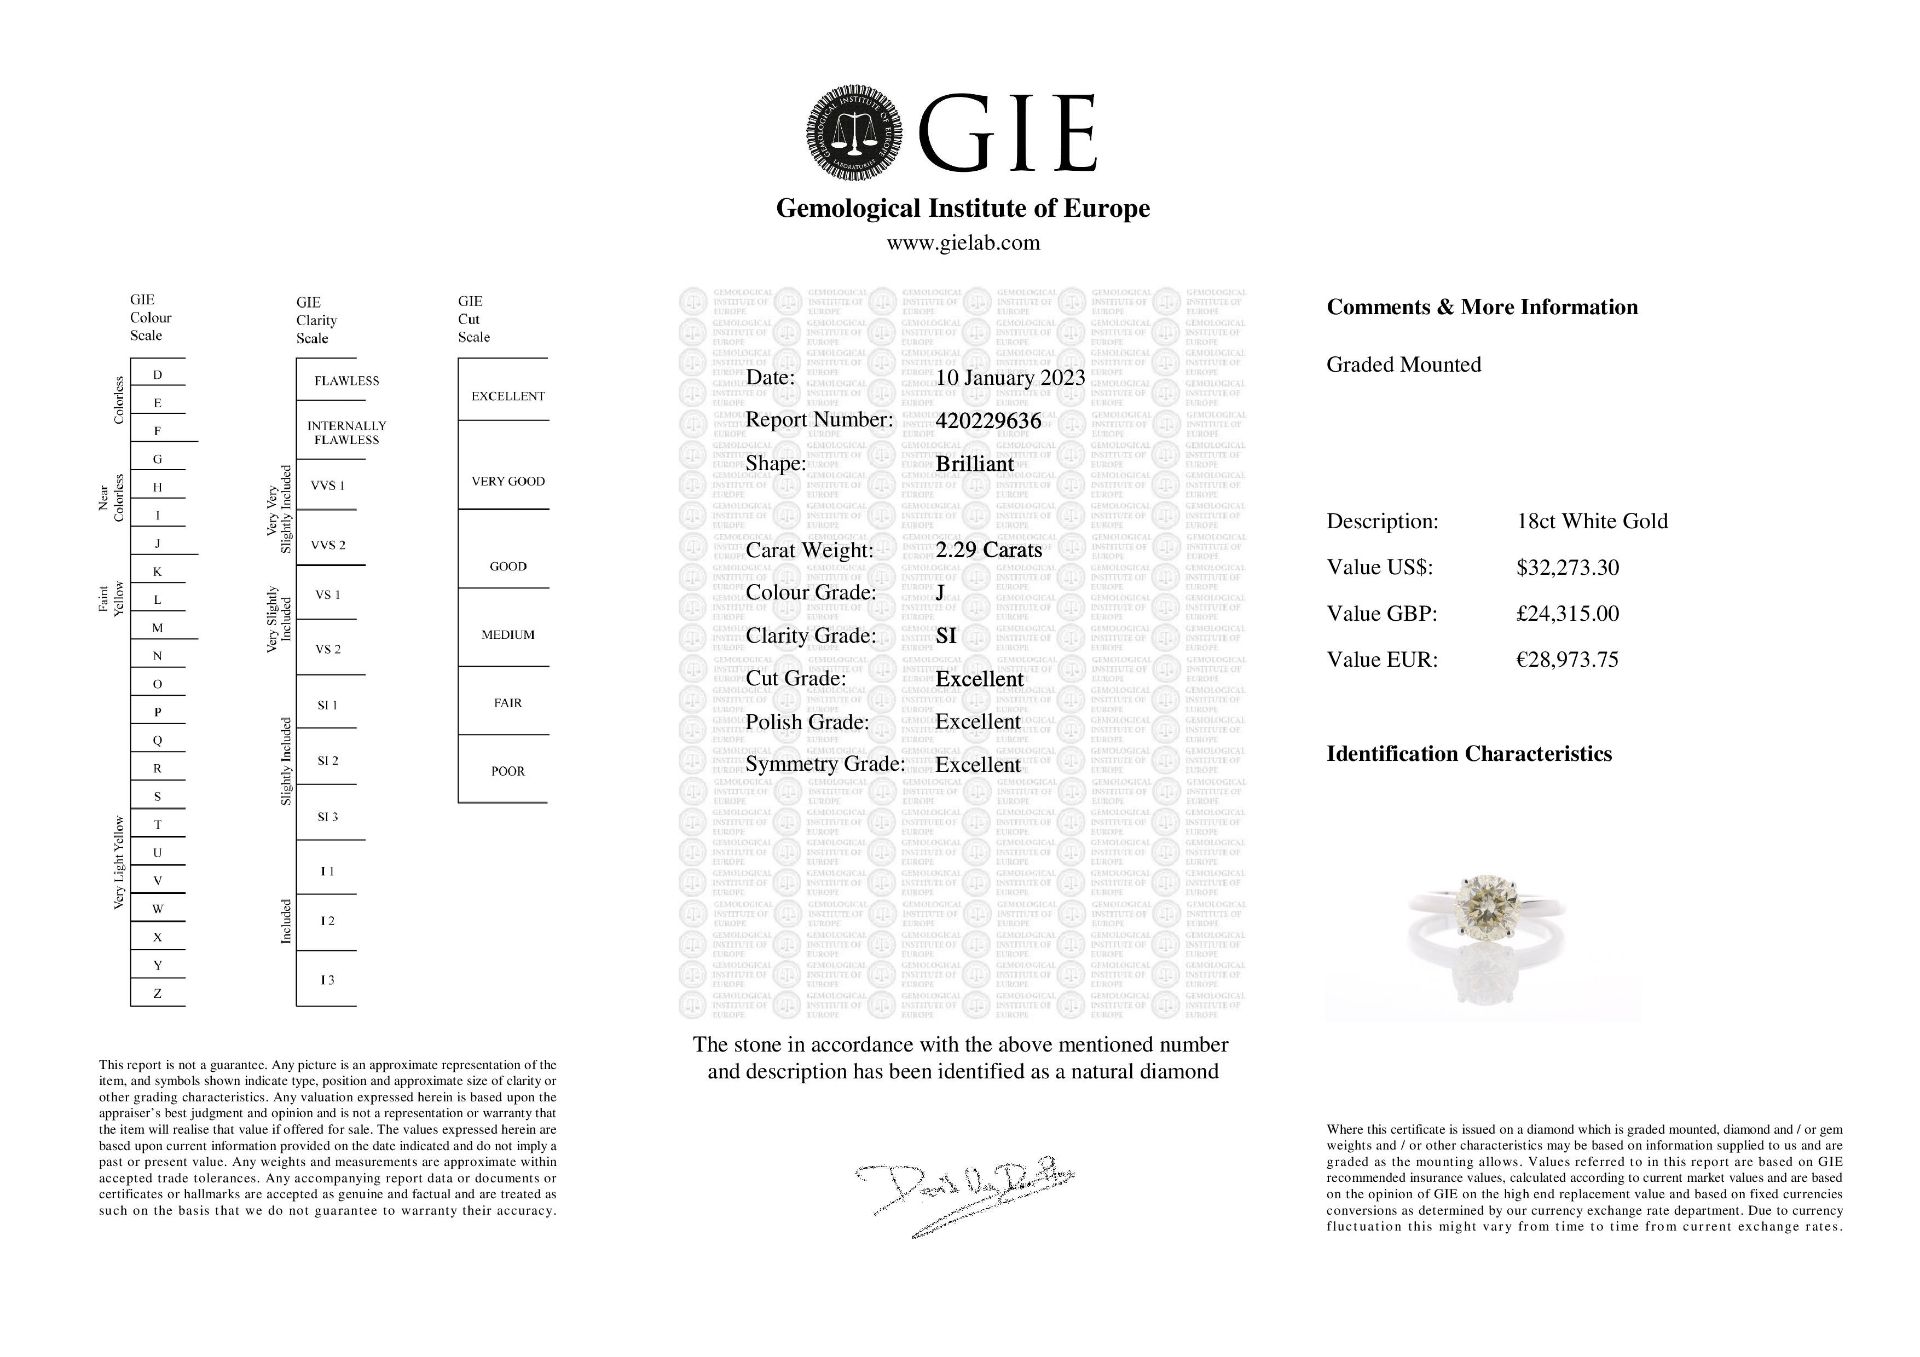 18ct White Gold Single Stone Rex Set Diamond Ring 2.29 Carats - Valued By GIE £24,315.00 - A massive - Image 5 of 5